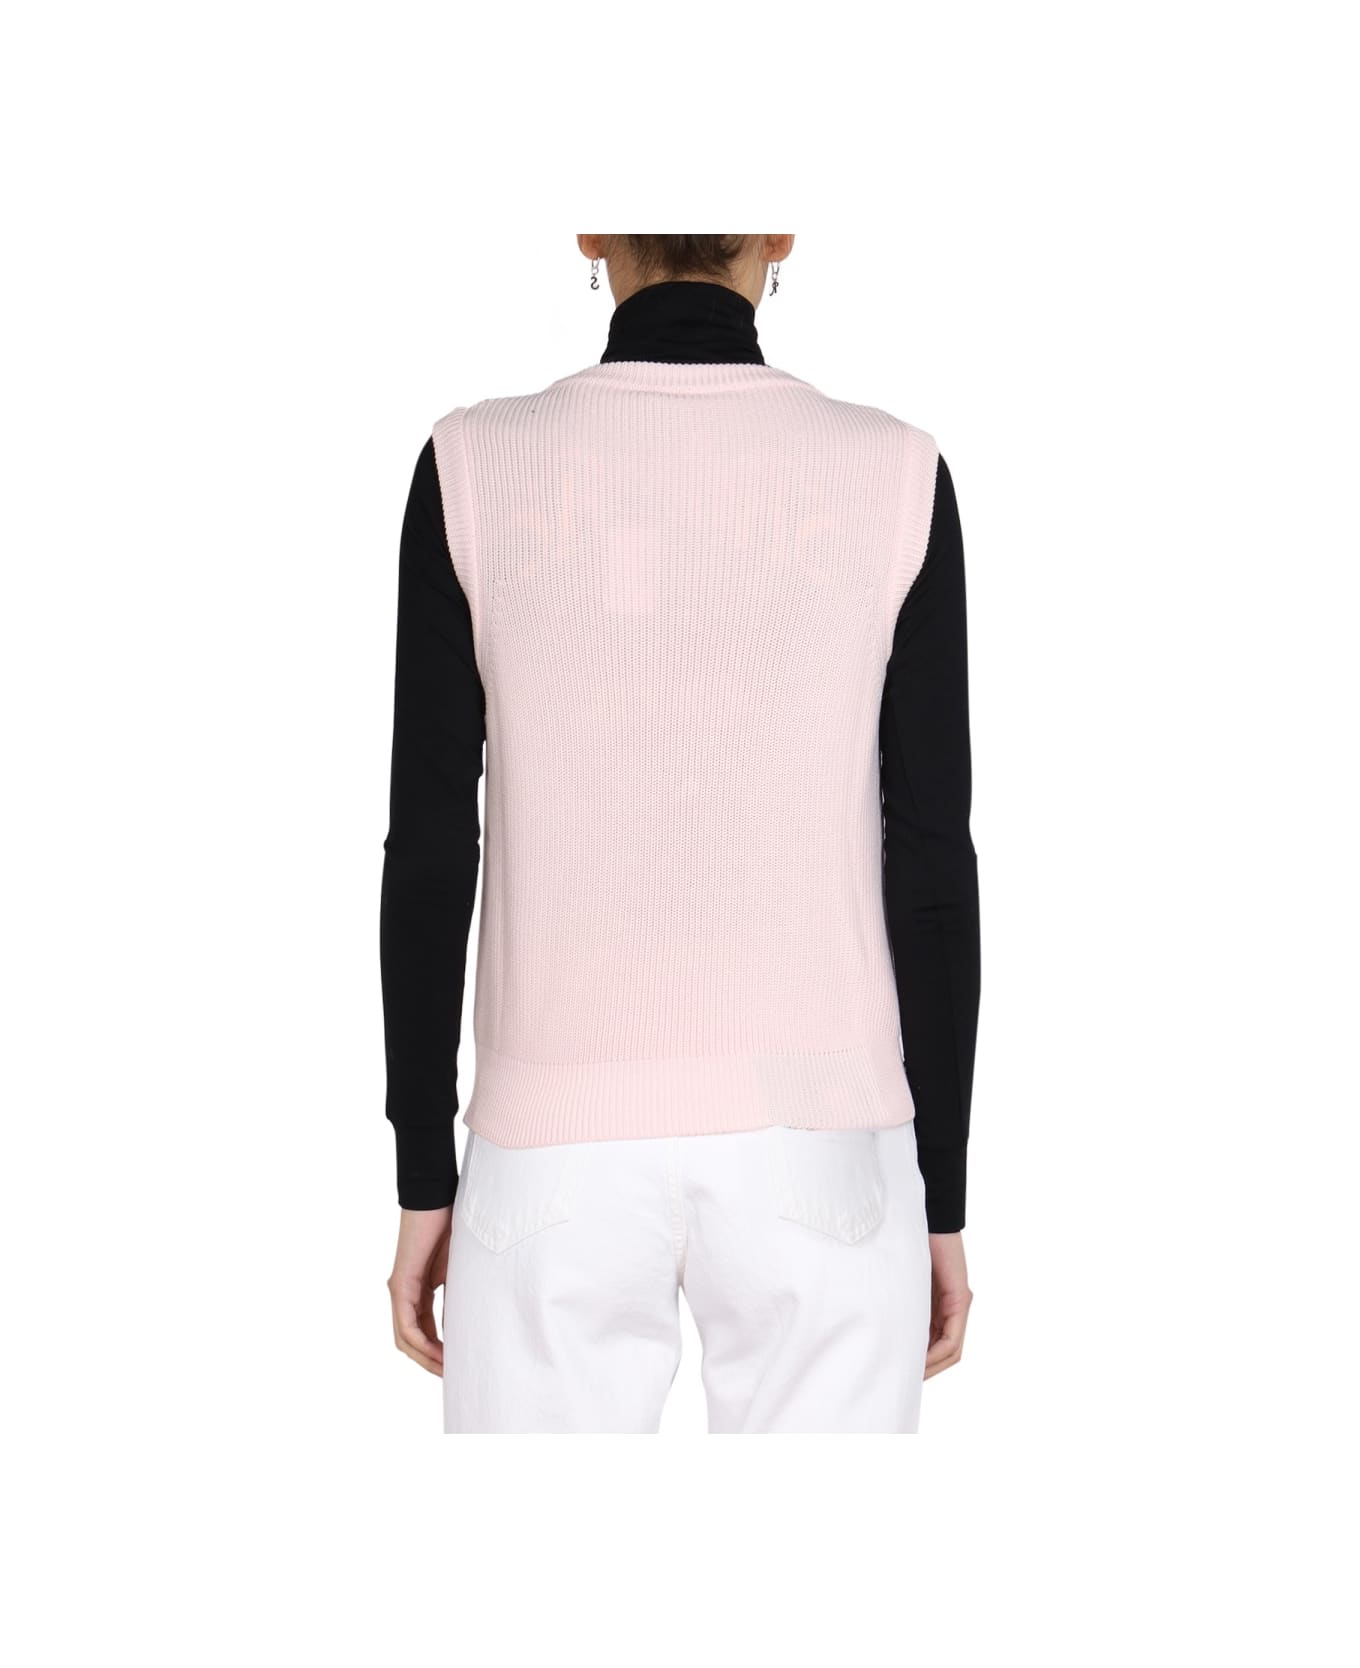 Raf Simons Knitted Vest - PINK ベスト